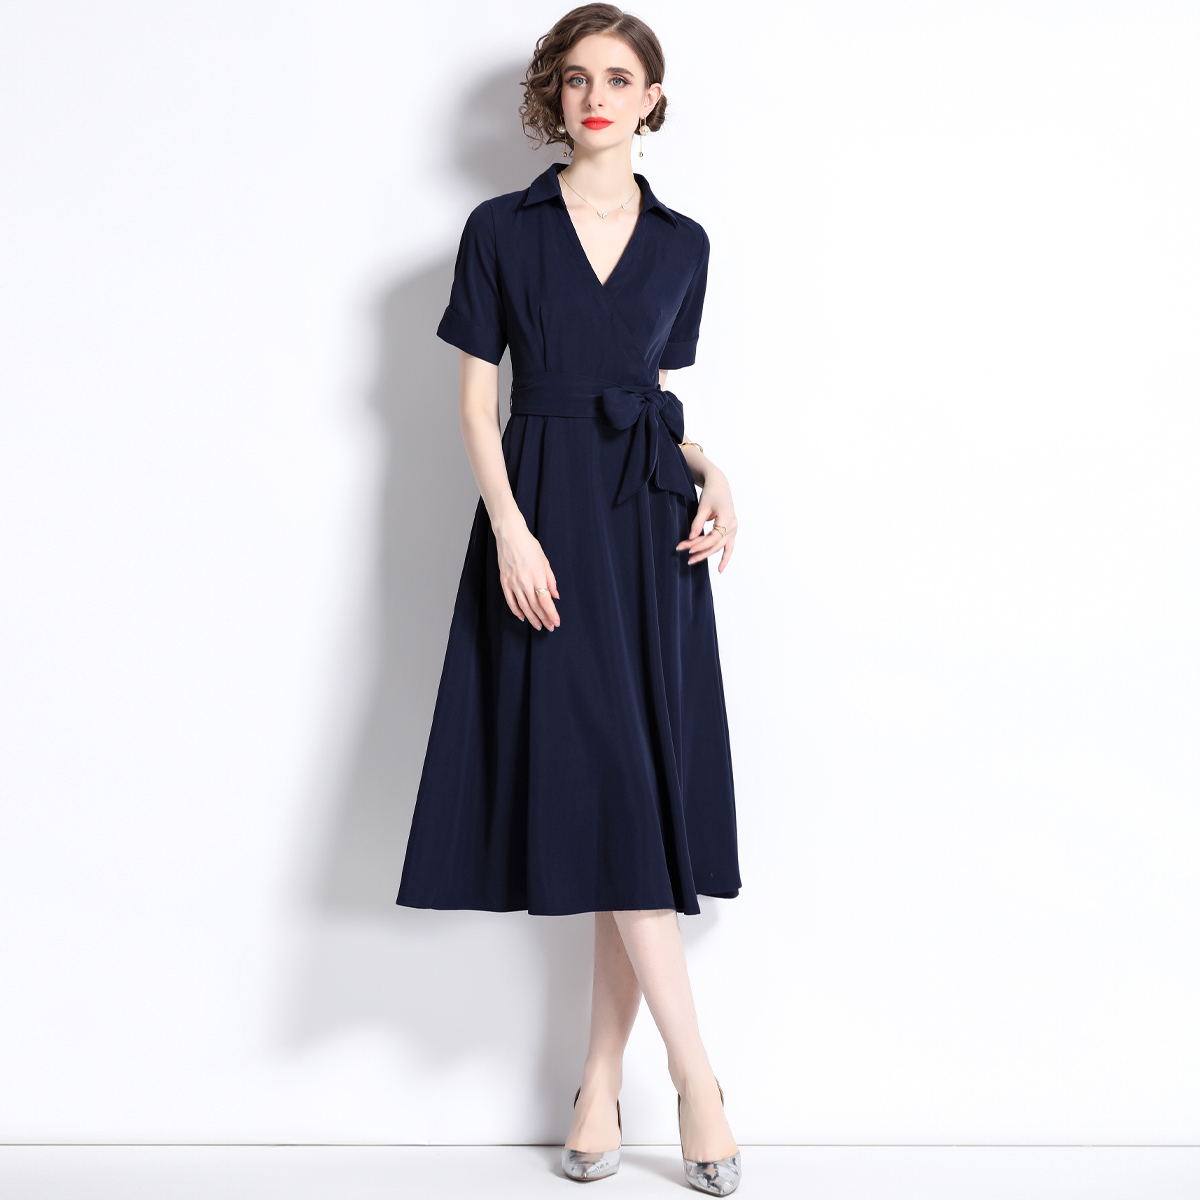 Slim retro France style pinched waist long dress